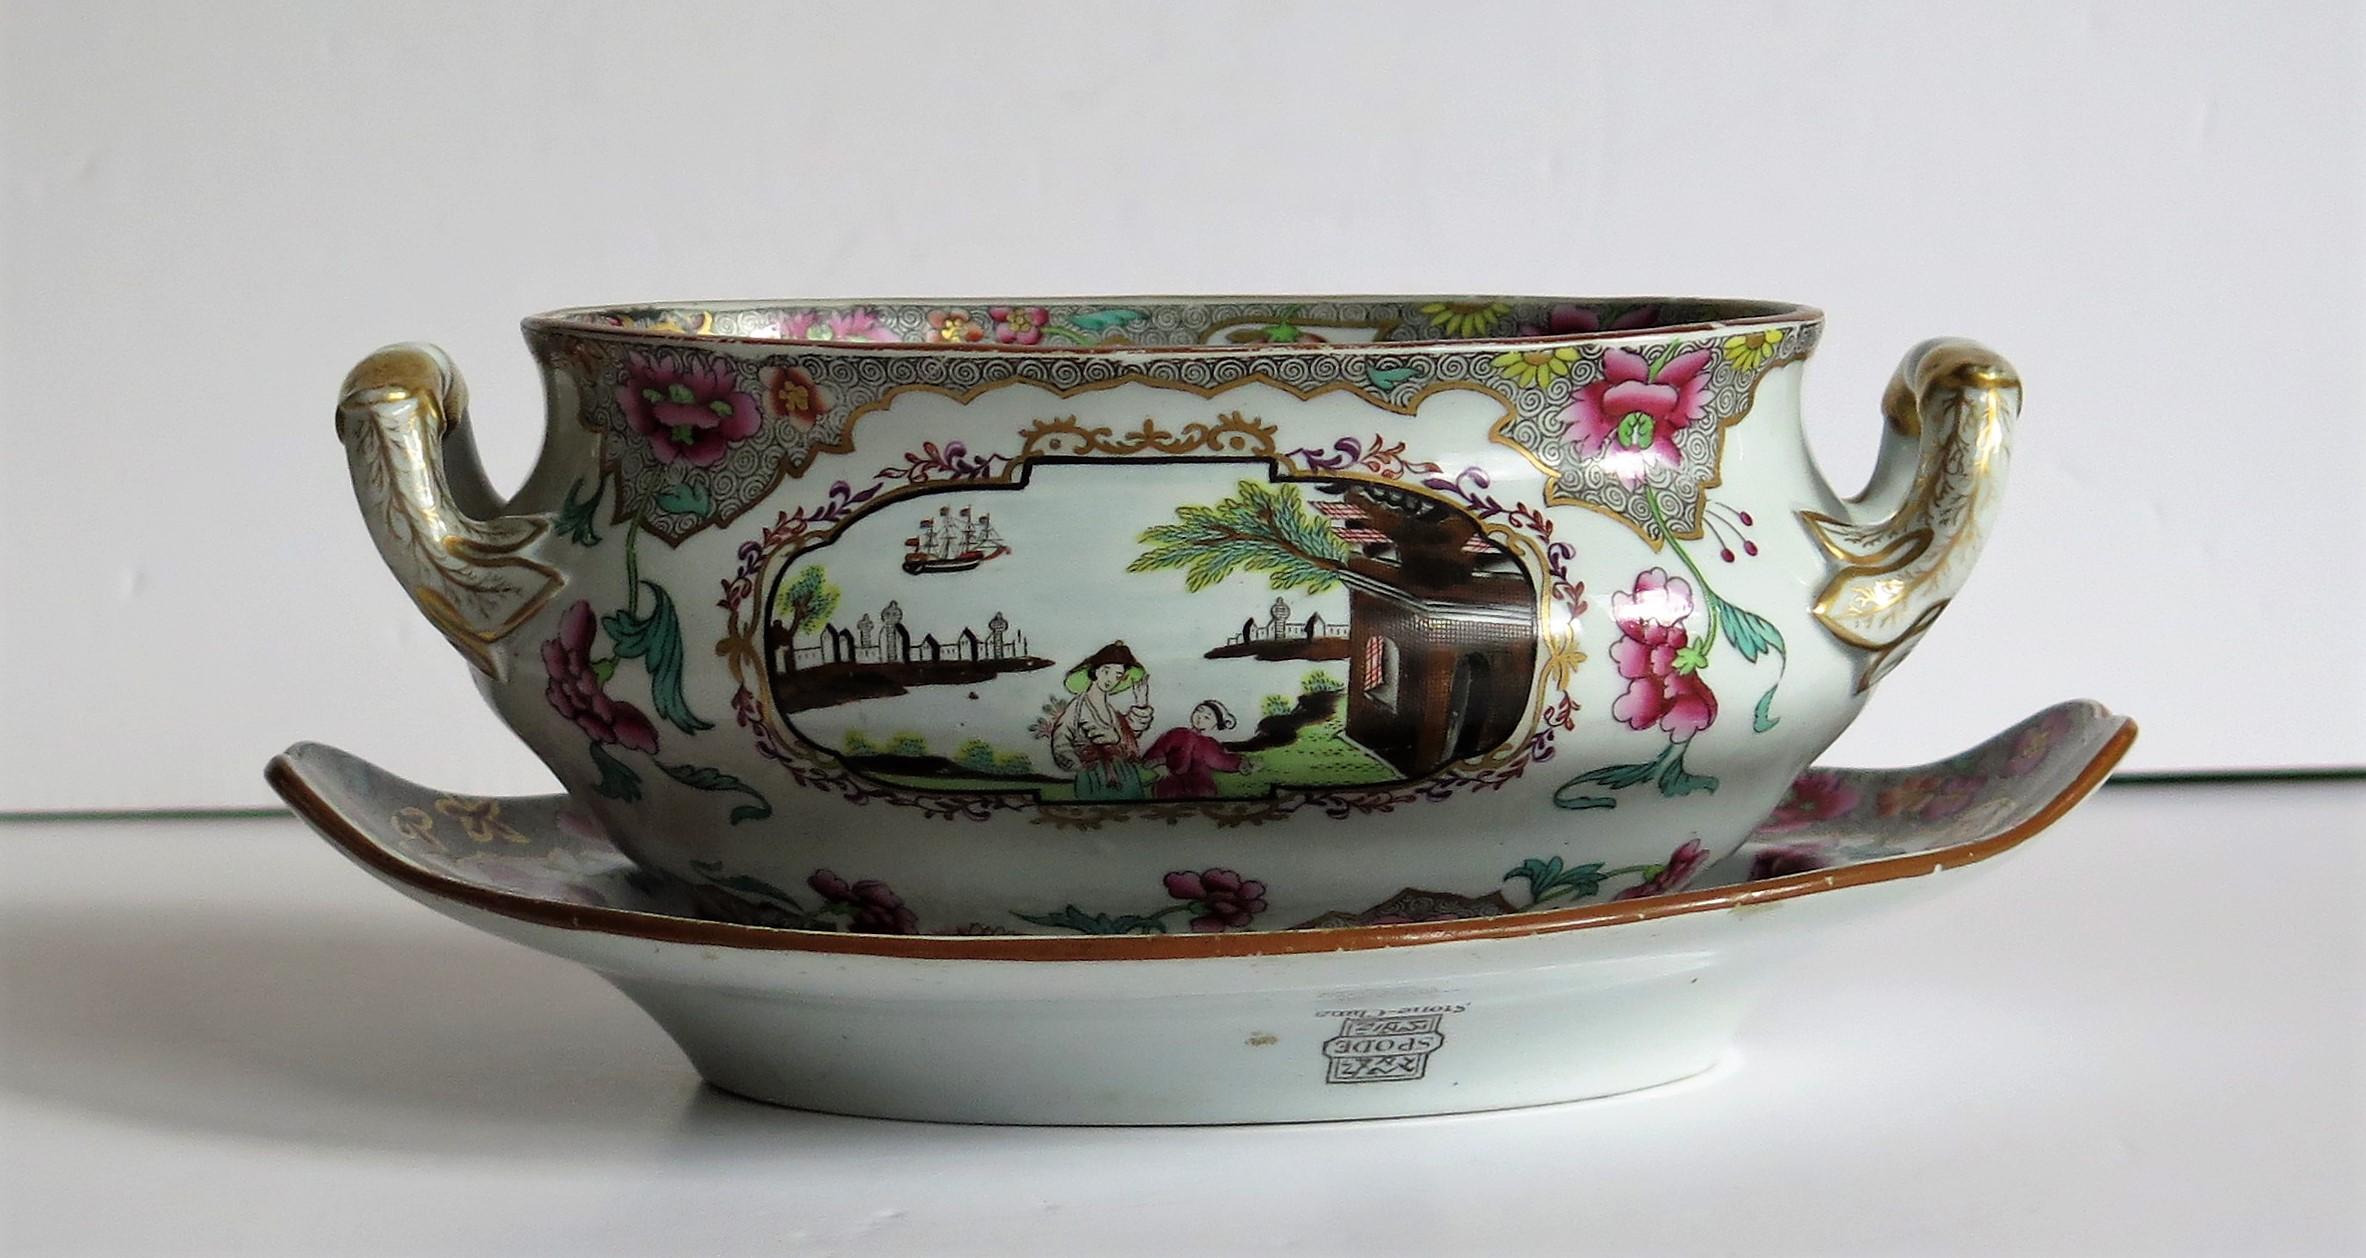 This is a very good sauce tureen and stand (Under Plate) made of ironstone (Spode's Stone China) in the Ship Pattern, No 3067, produced by the English, Spode factory early in the 19th century, George 111rd Period.

The pattern is called the Ship